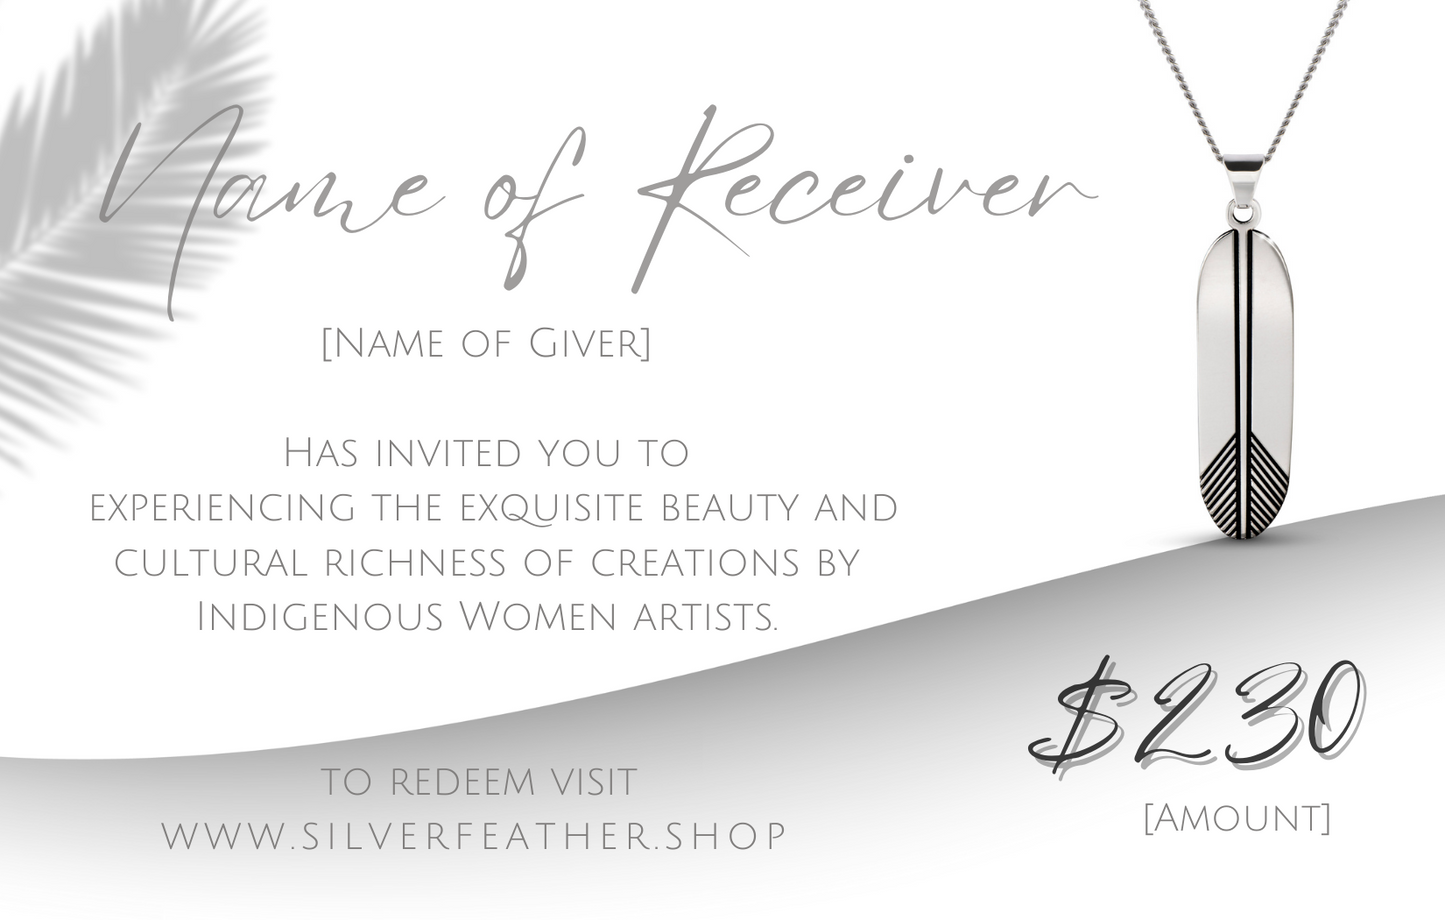 Your Silver Feather Gift Card